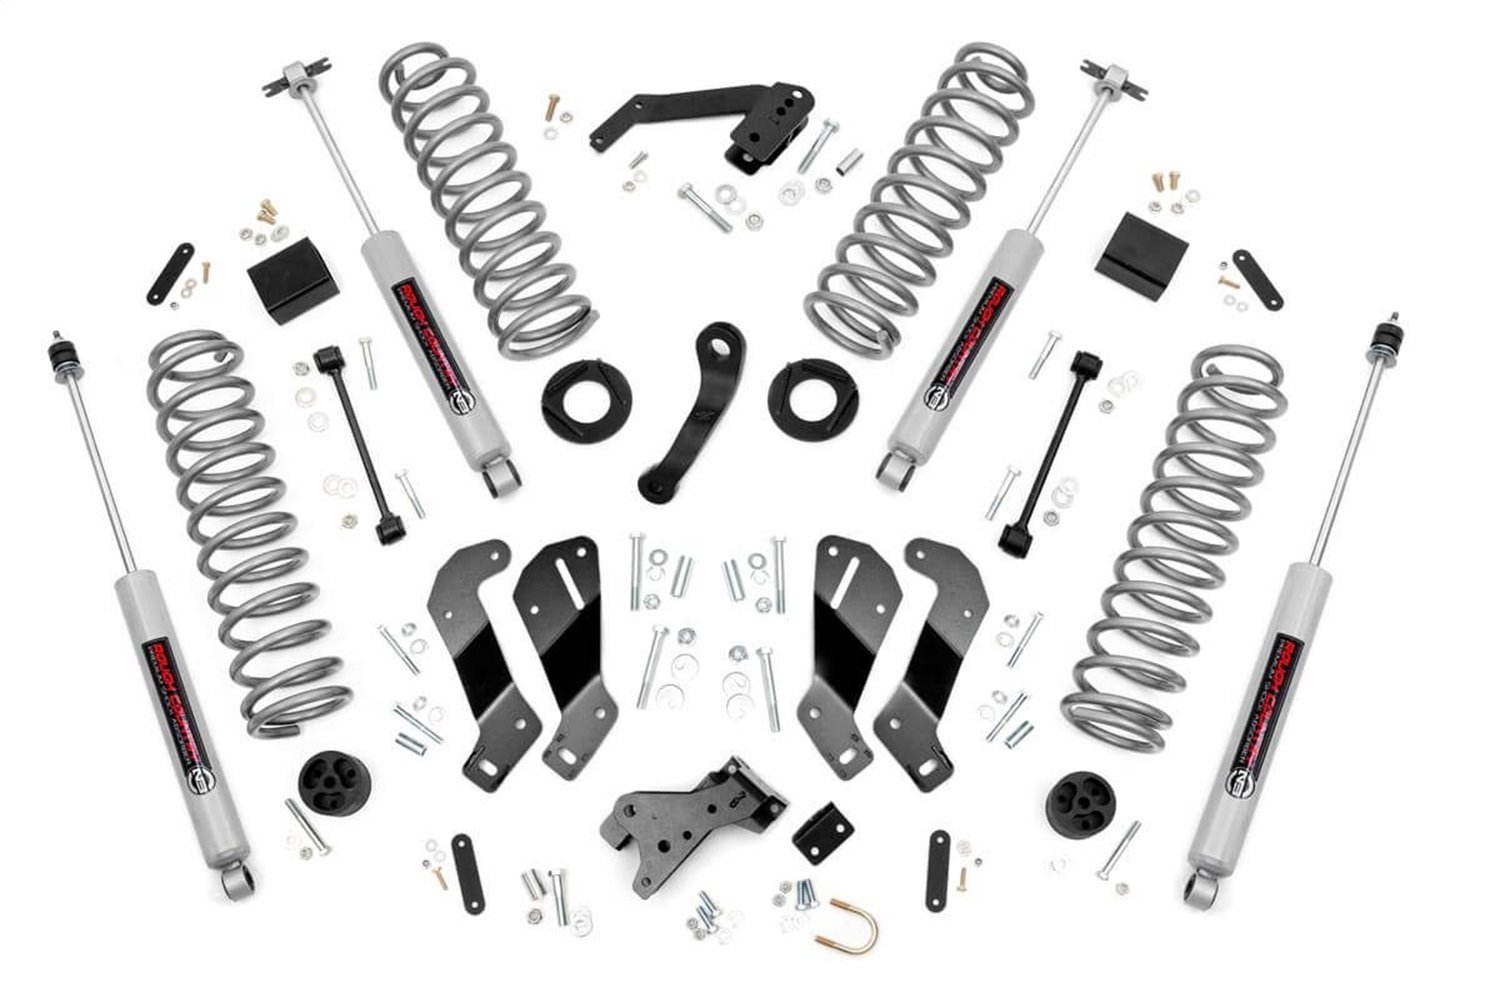 69430 Front and Rear Suspension Lift Kit, Lift Amount: 3.5 in. Front/3.5 in. Rear